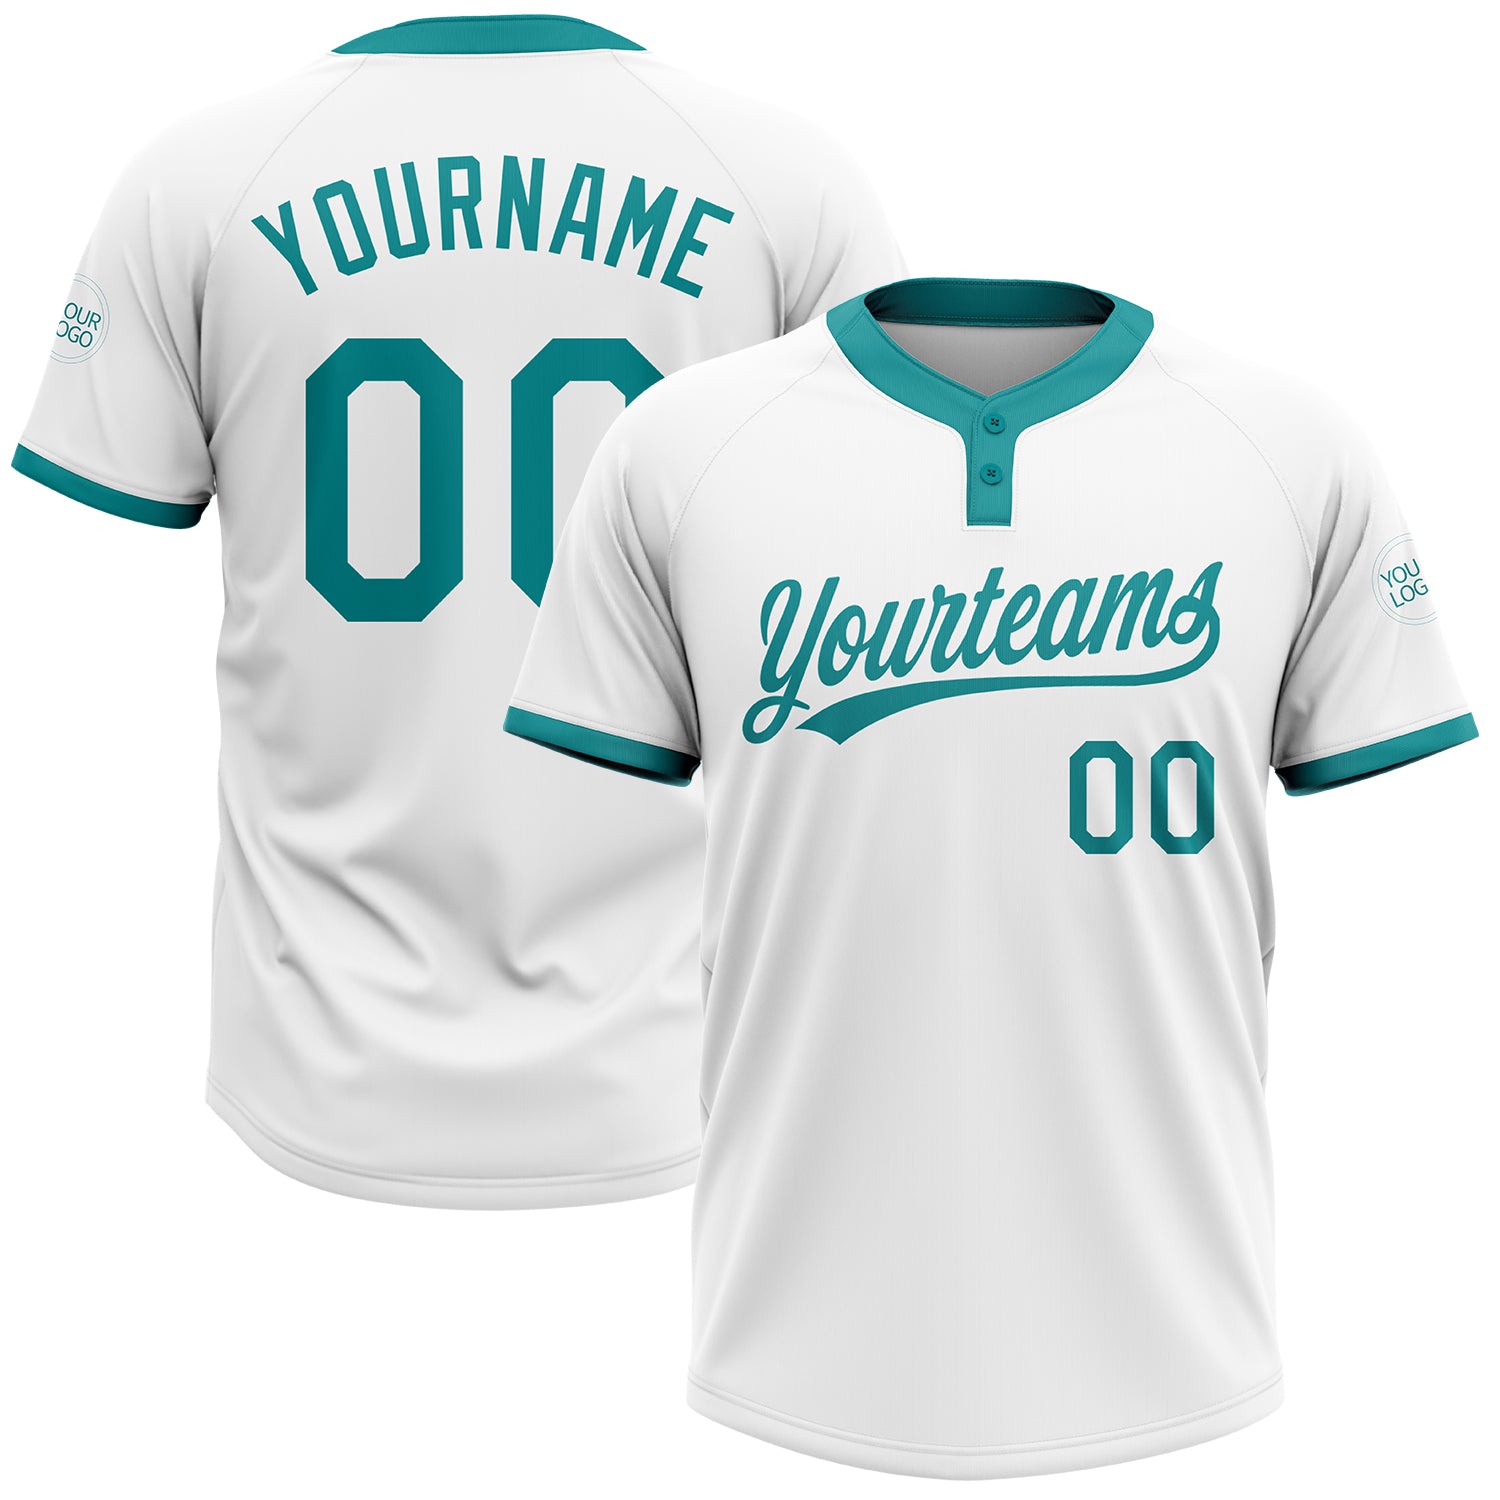 Comparing Miami Marlins Throwback Teal jerseys to other great